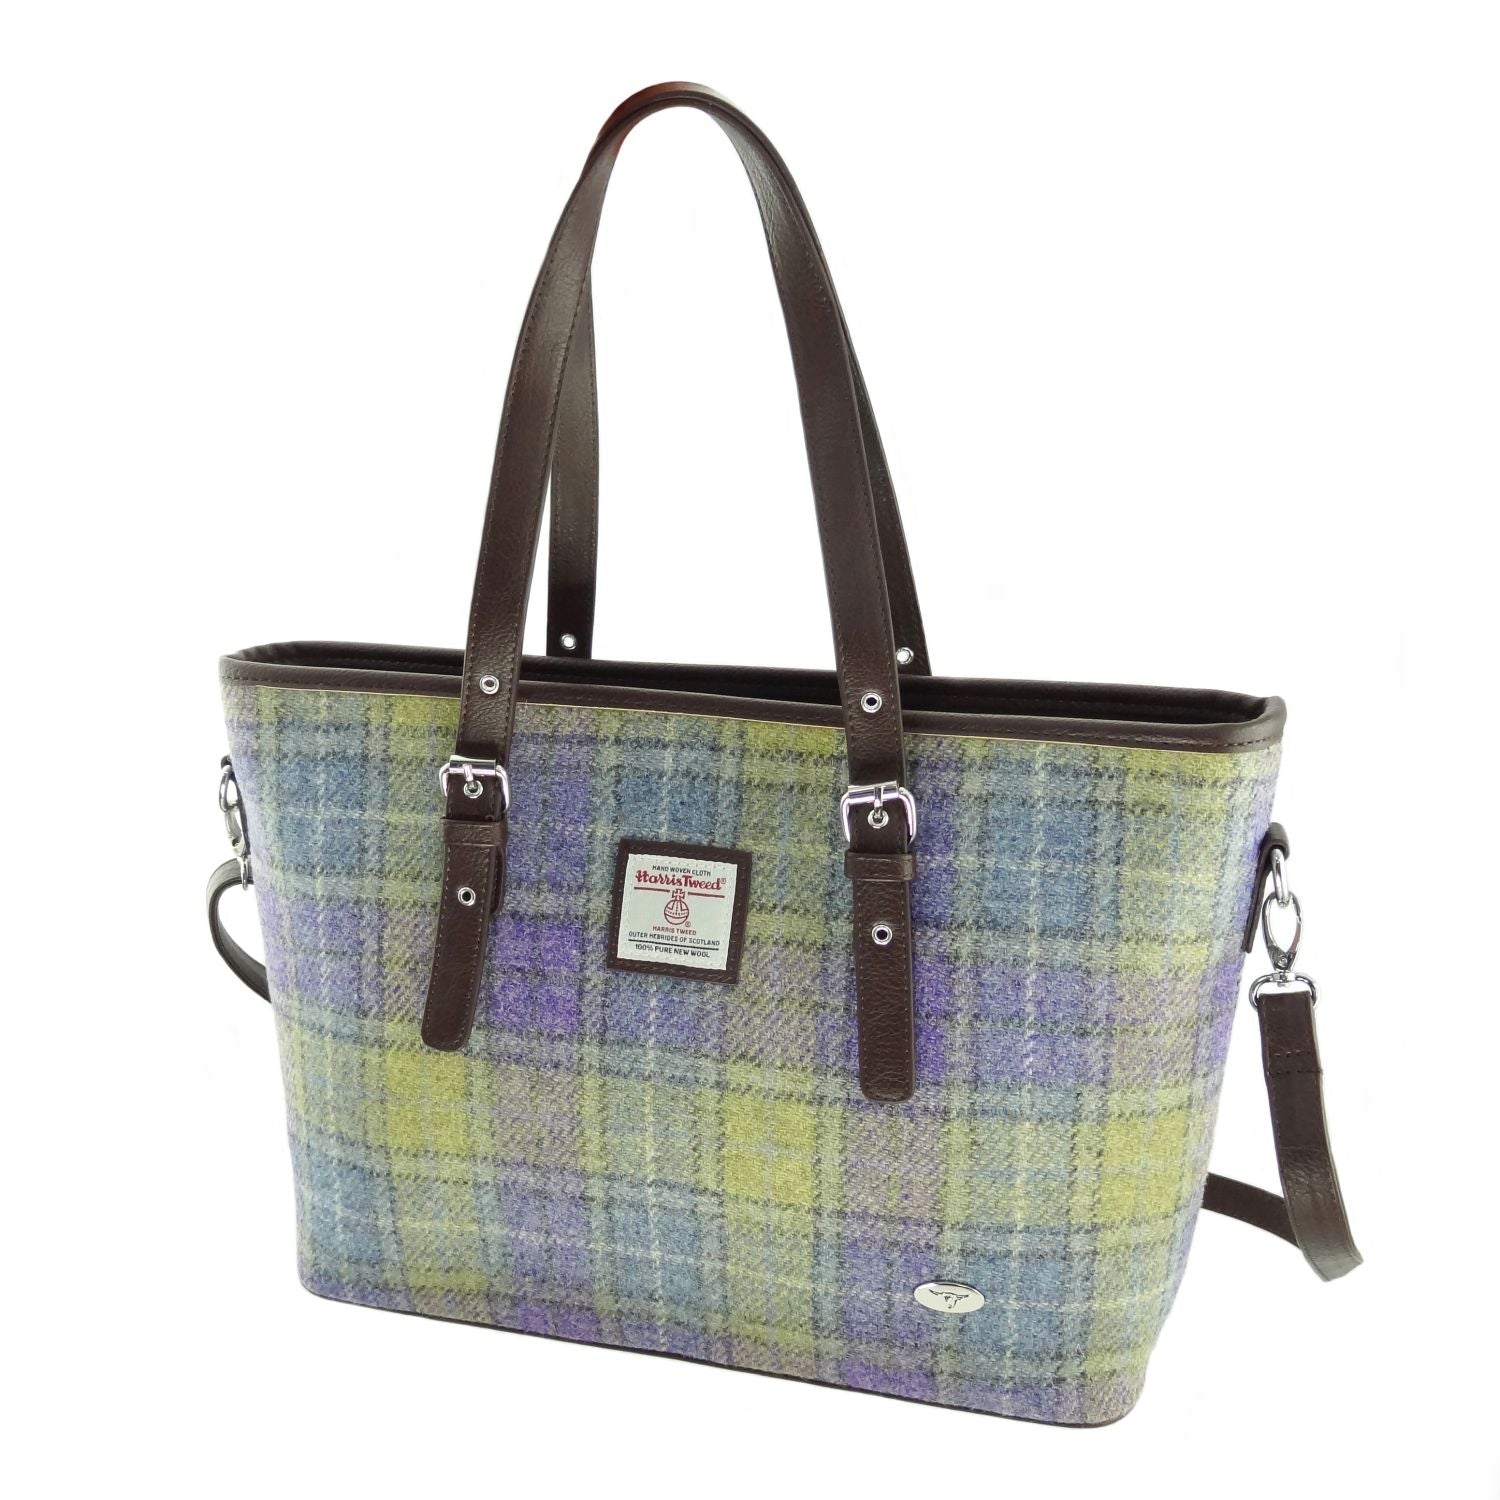 Muted Lilac and Green Check Scottish Harris Tweed Women's Large Tote Bag with Shoulder Strap Glen Appin of Scotland